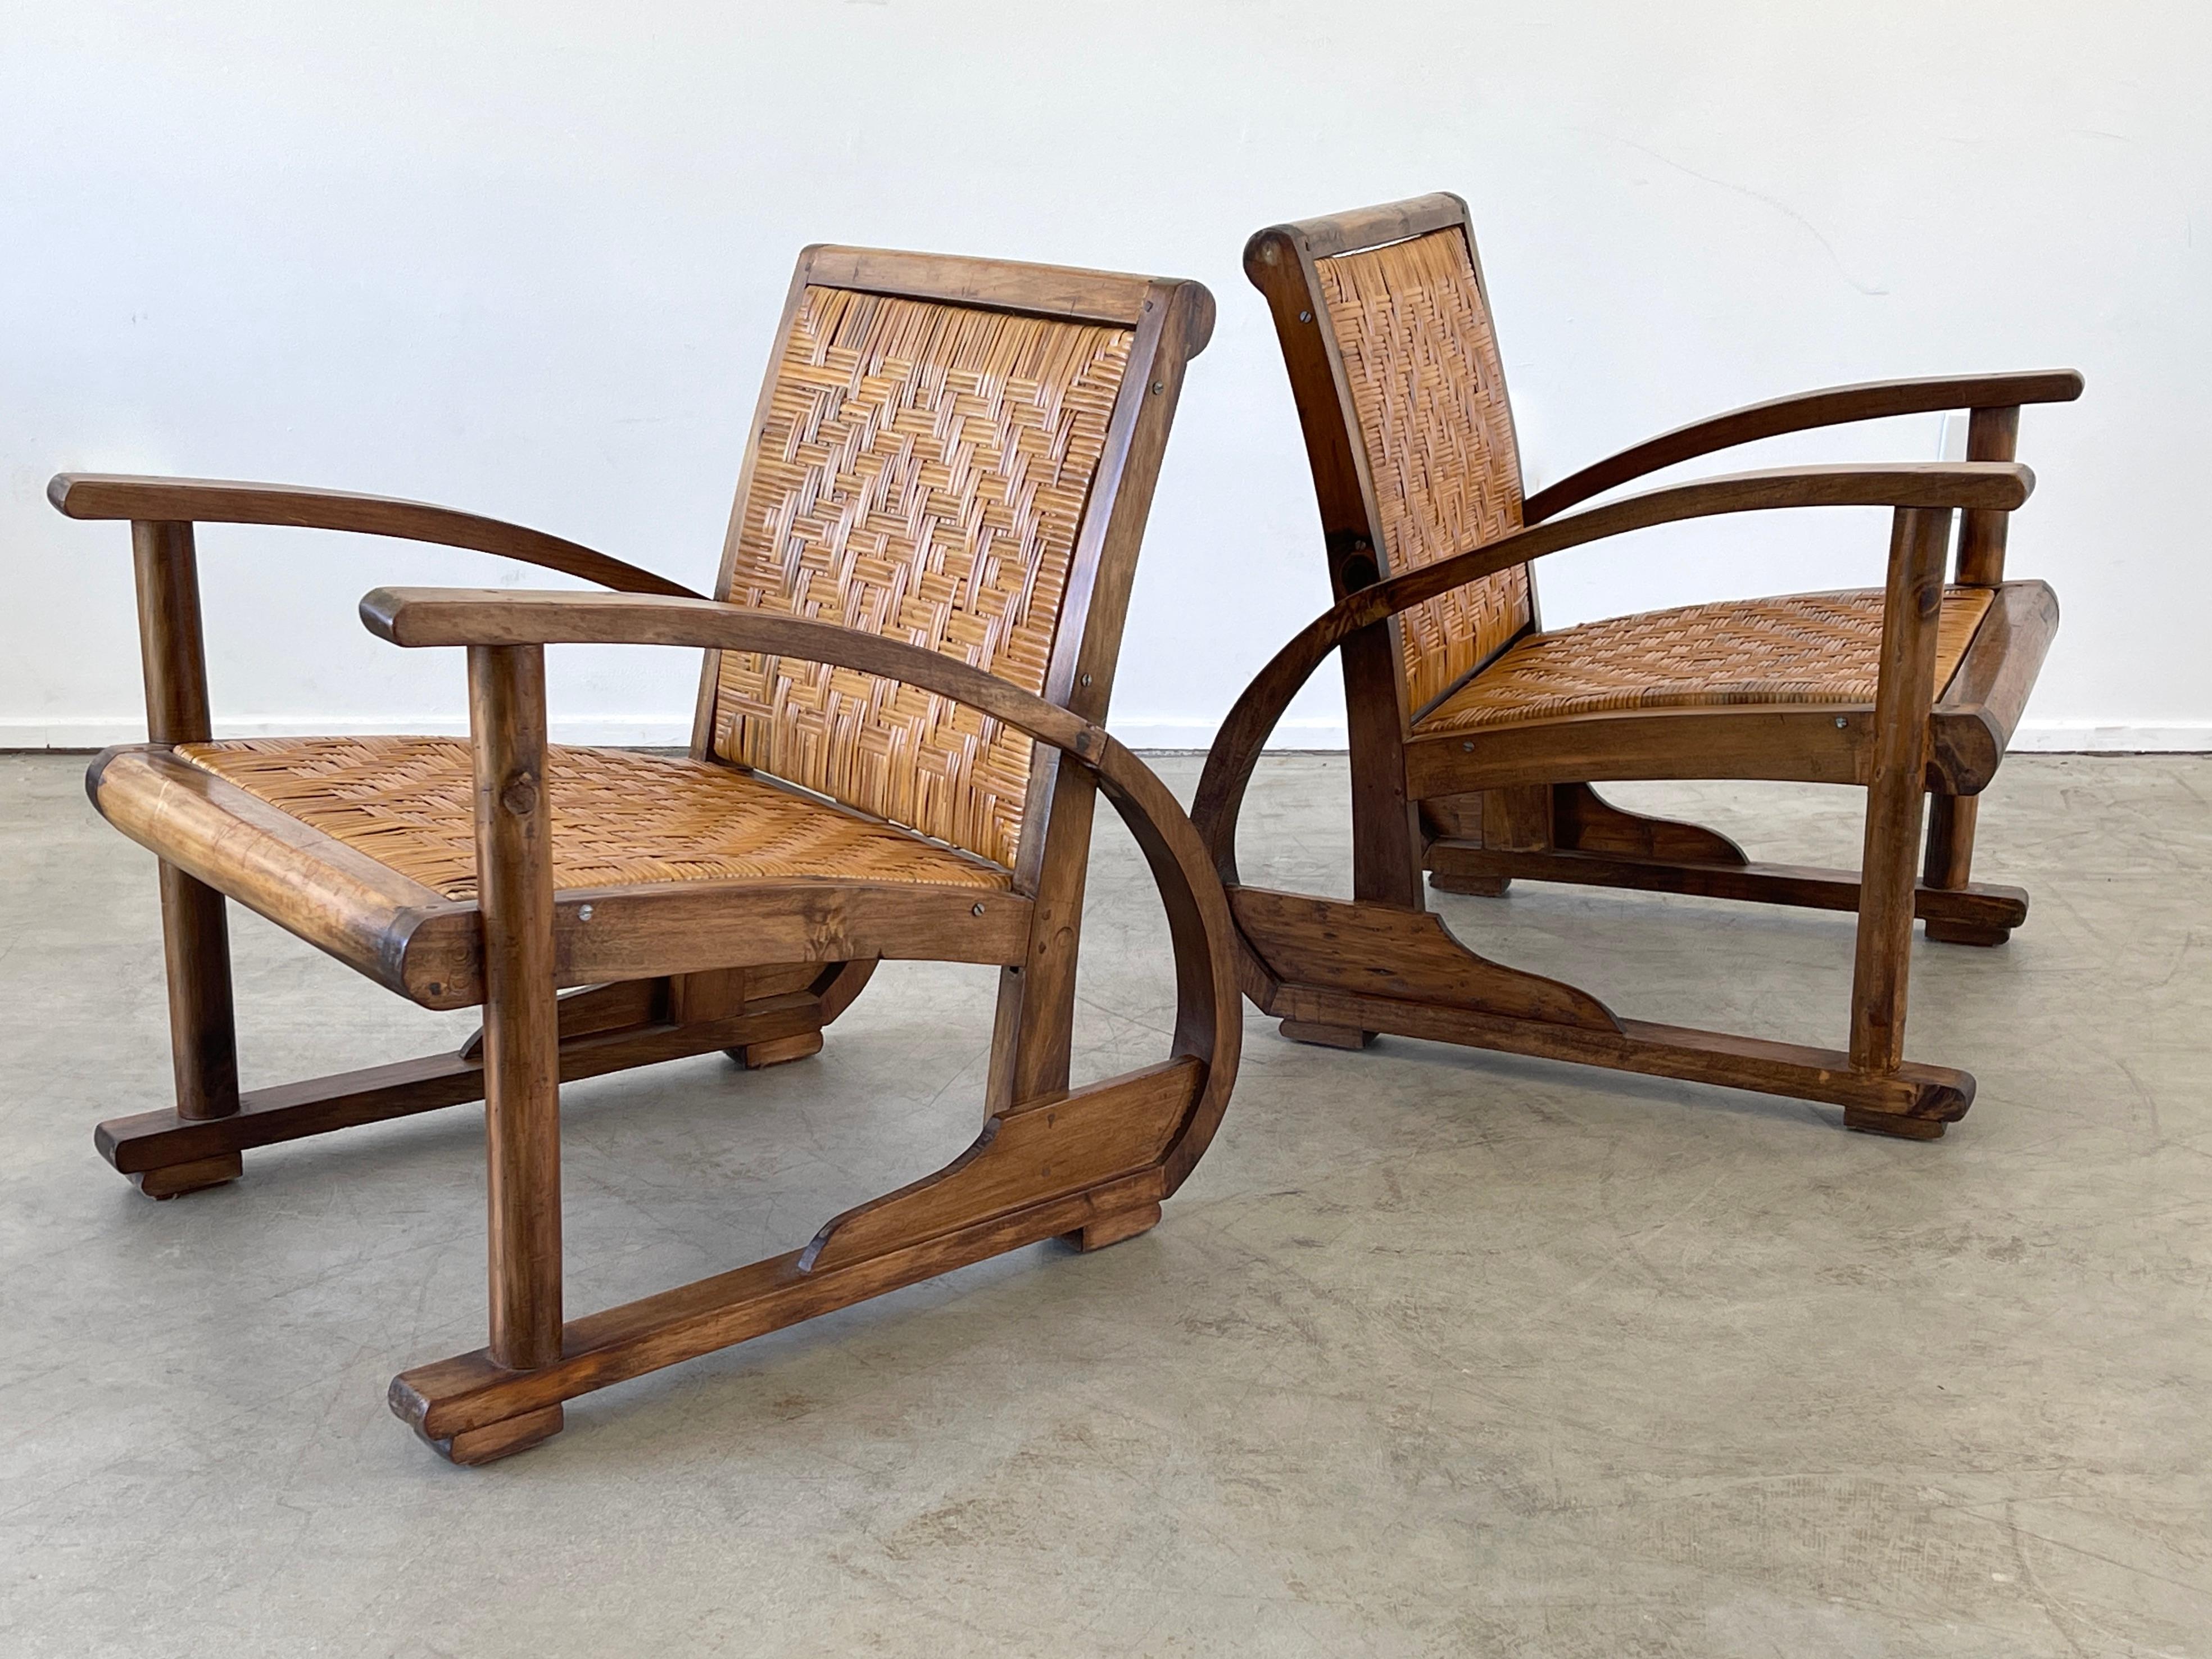 Pair of 1940's French Art Deco style chairs with curved oak frames and cane seat and backs. 
Great Sculptural shape and patina.